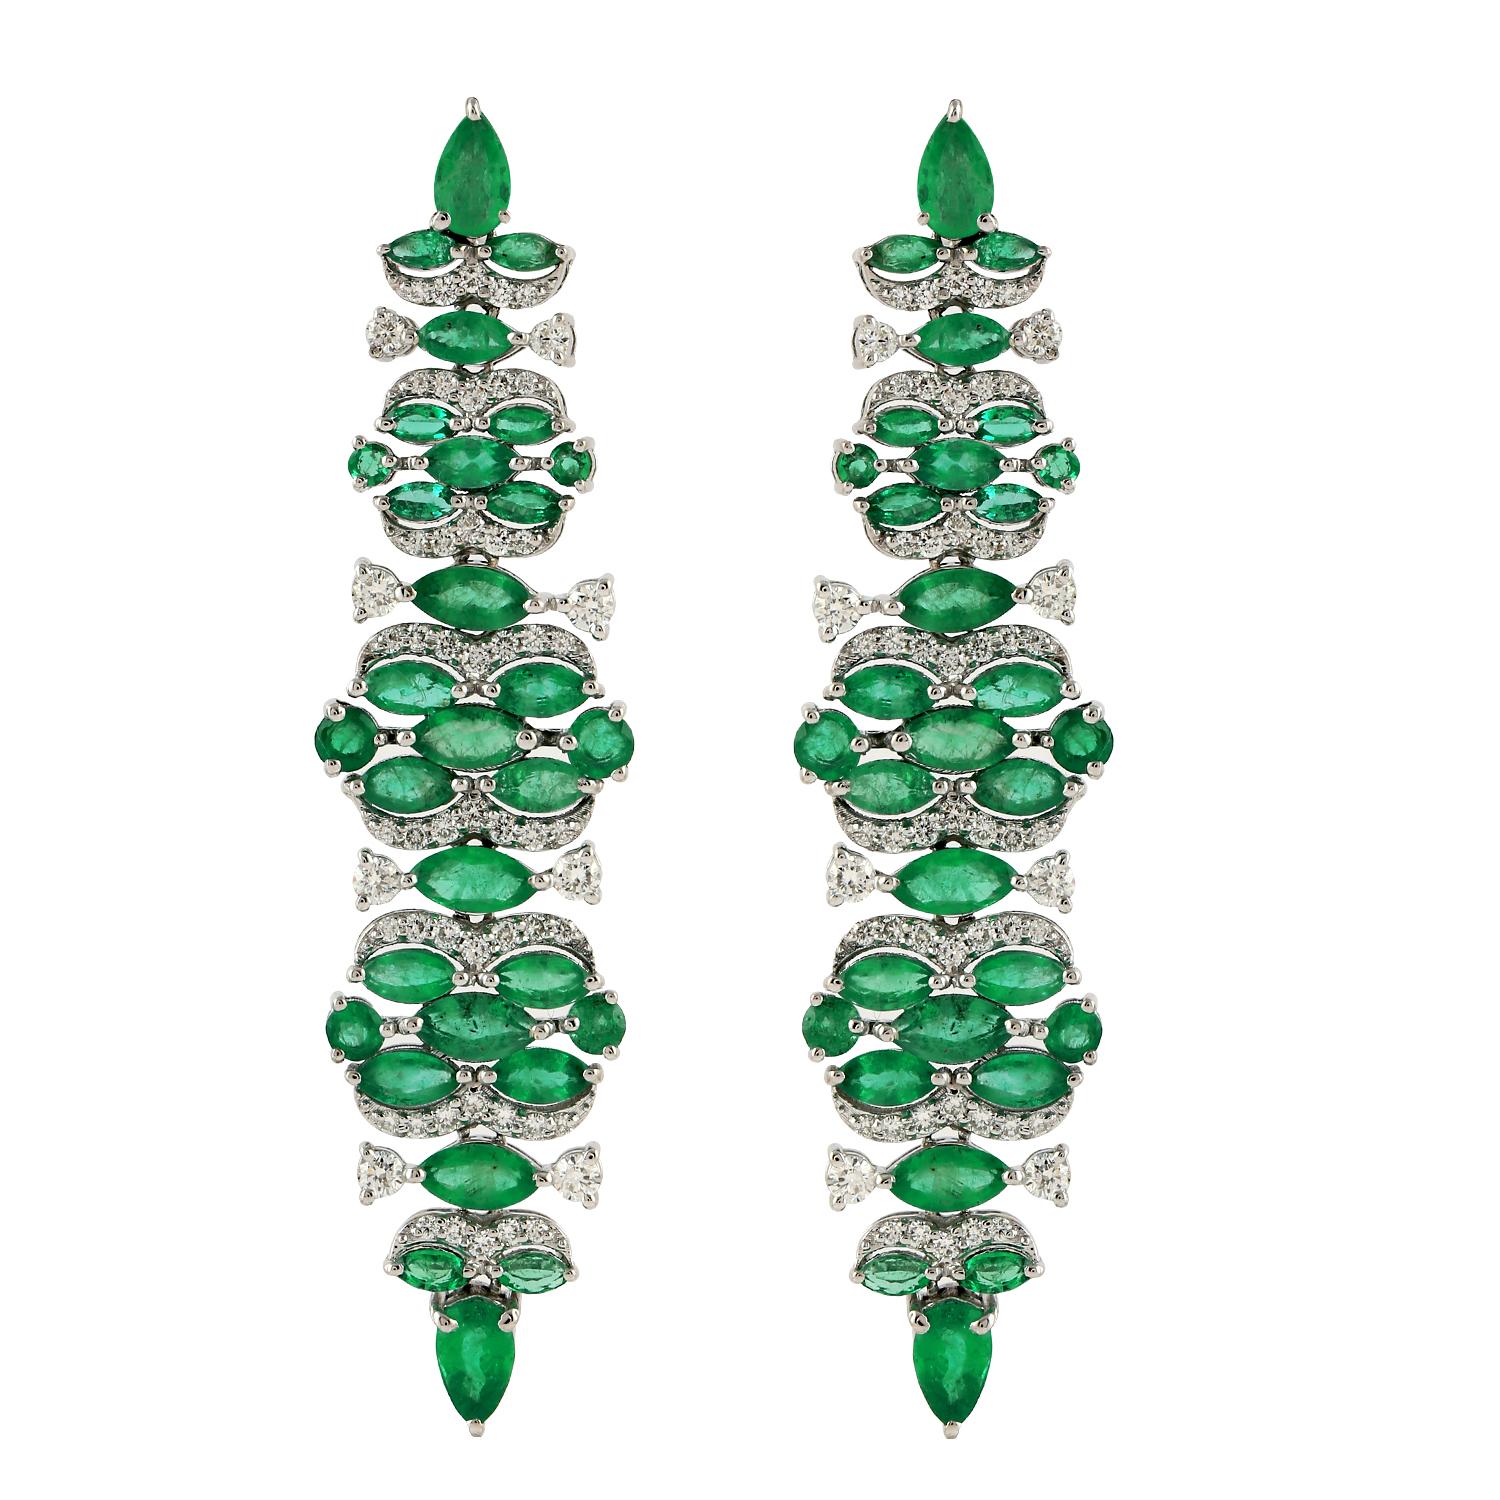 Emerald Long Dangle Earrings With Diamonds Made In 14k White Gold For Sale